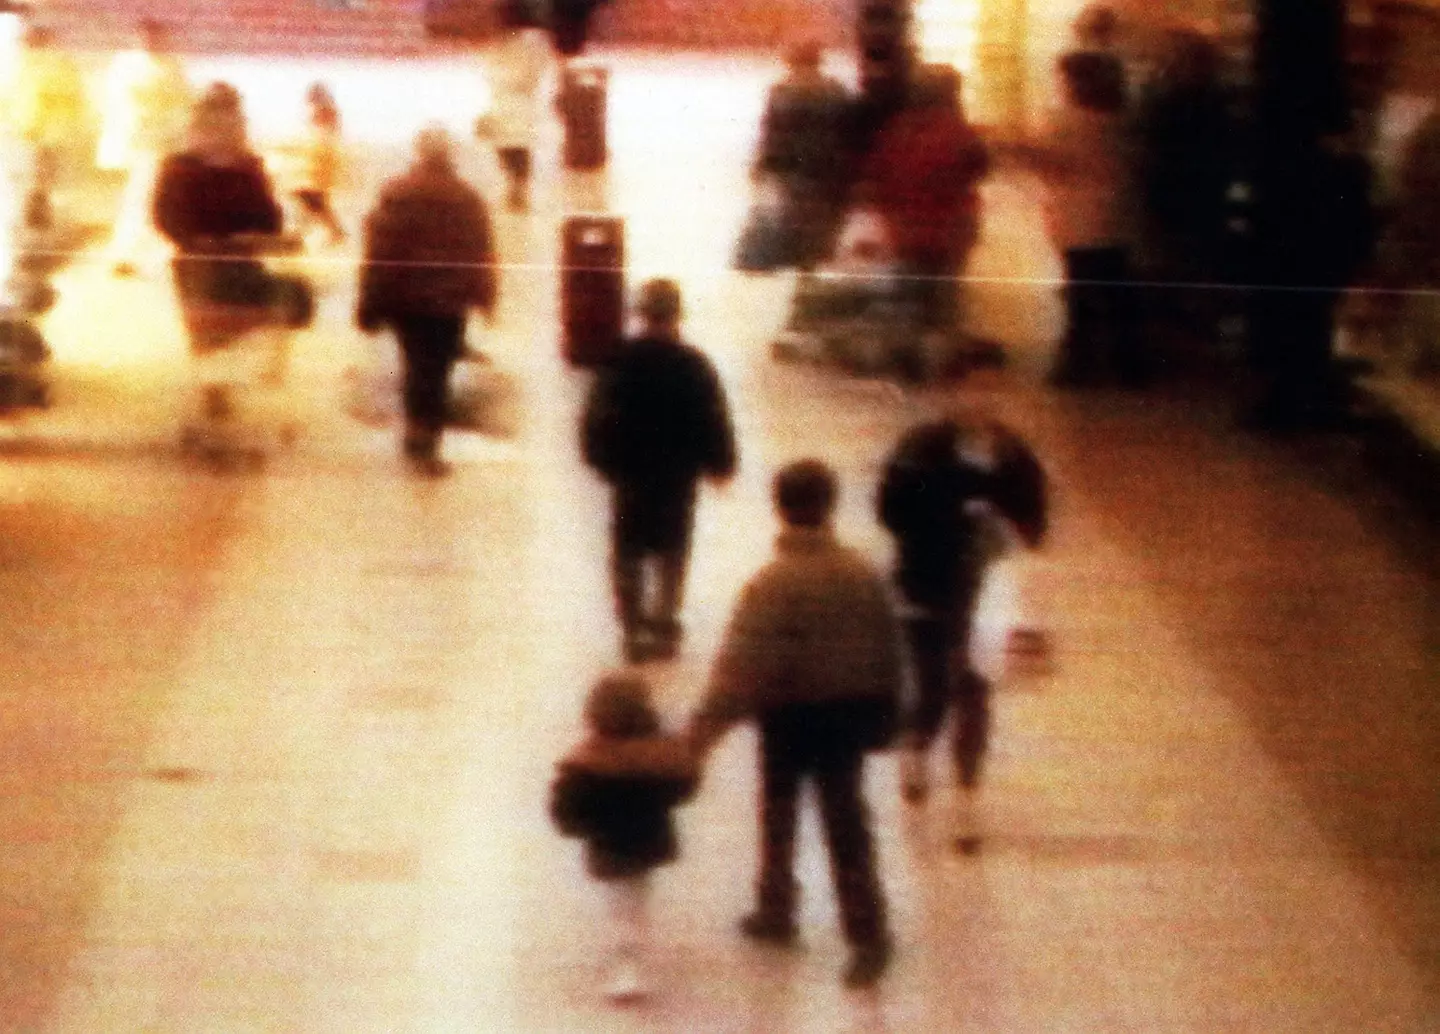 James Bulger was led away from a shopping centre and killed.